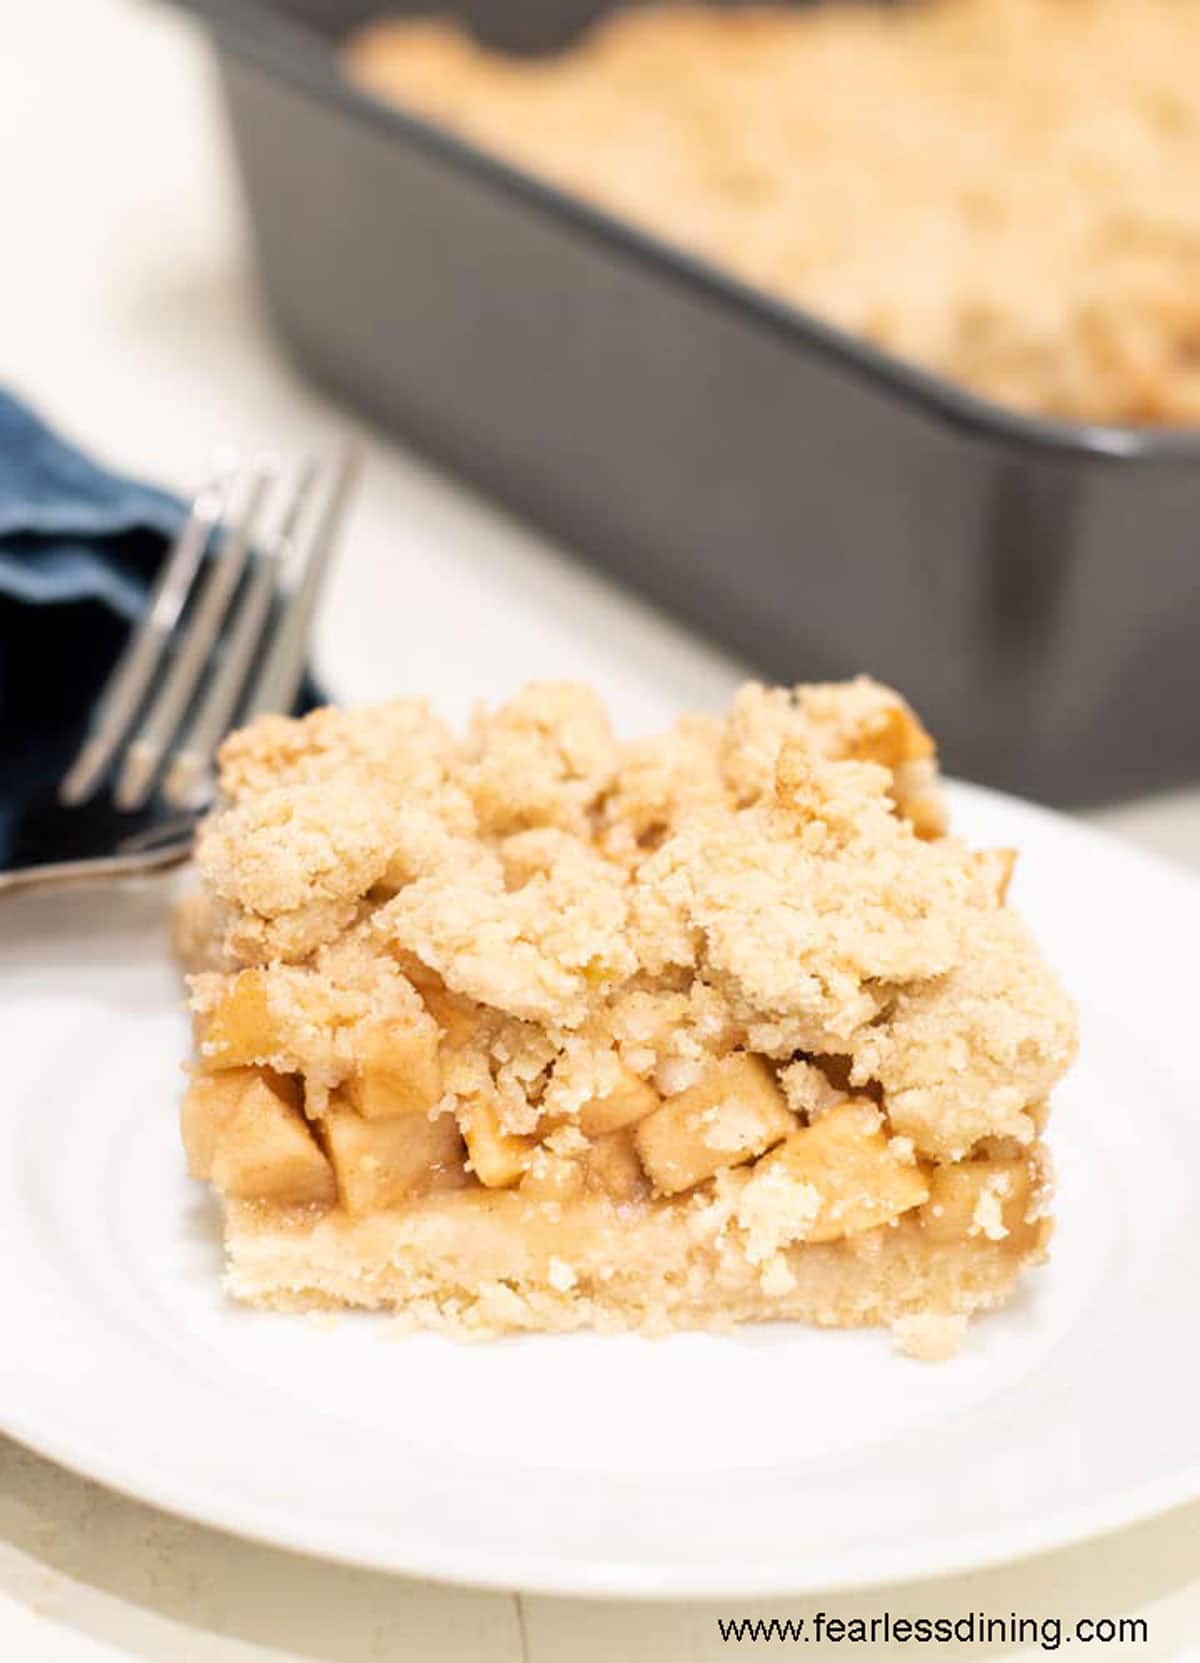 A slice of gluten free apple crumble bar on a small white plate.